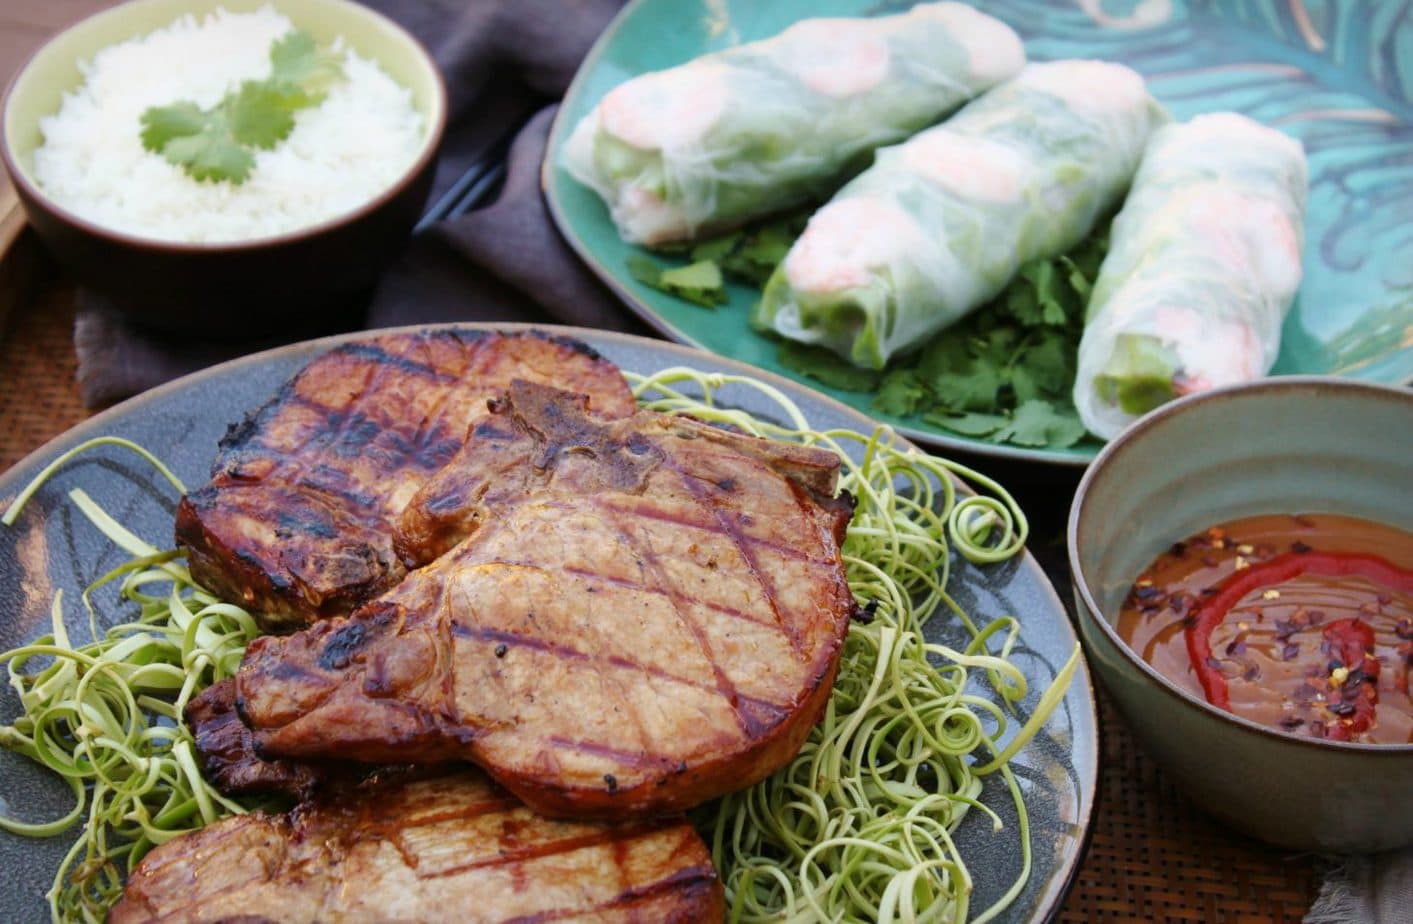 A platter of grilled pork chops and some Vietnamese Salad rolls.